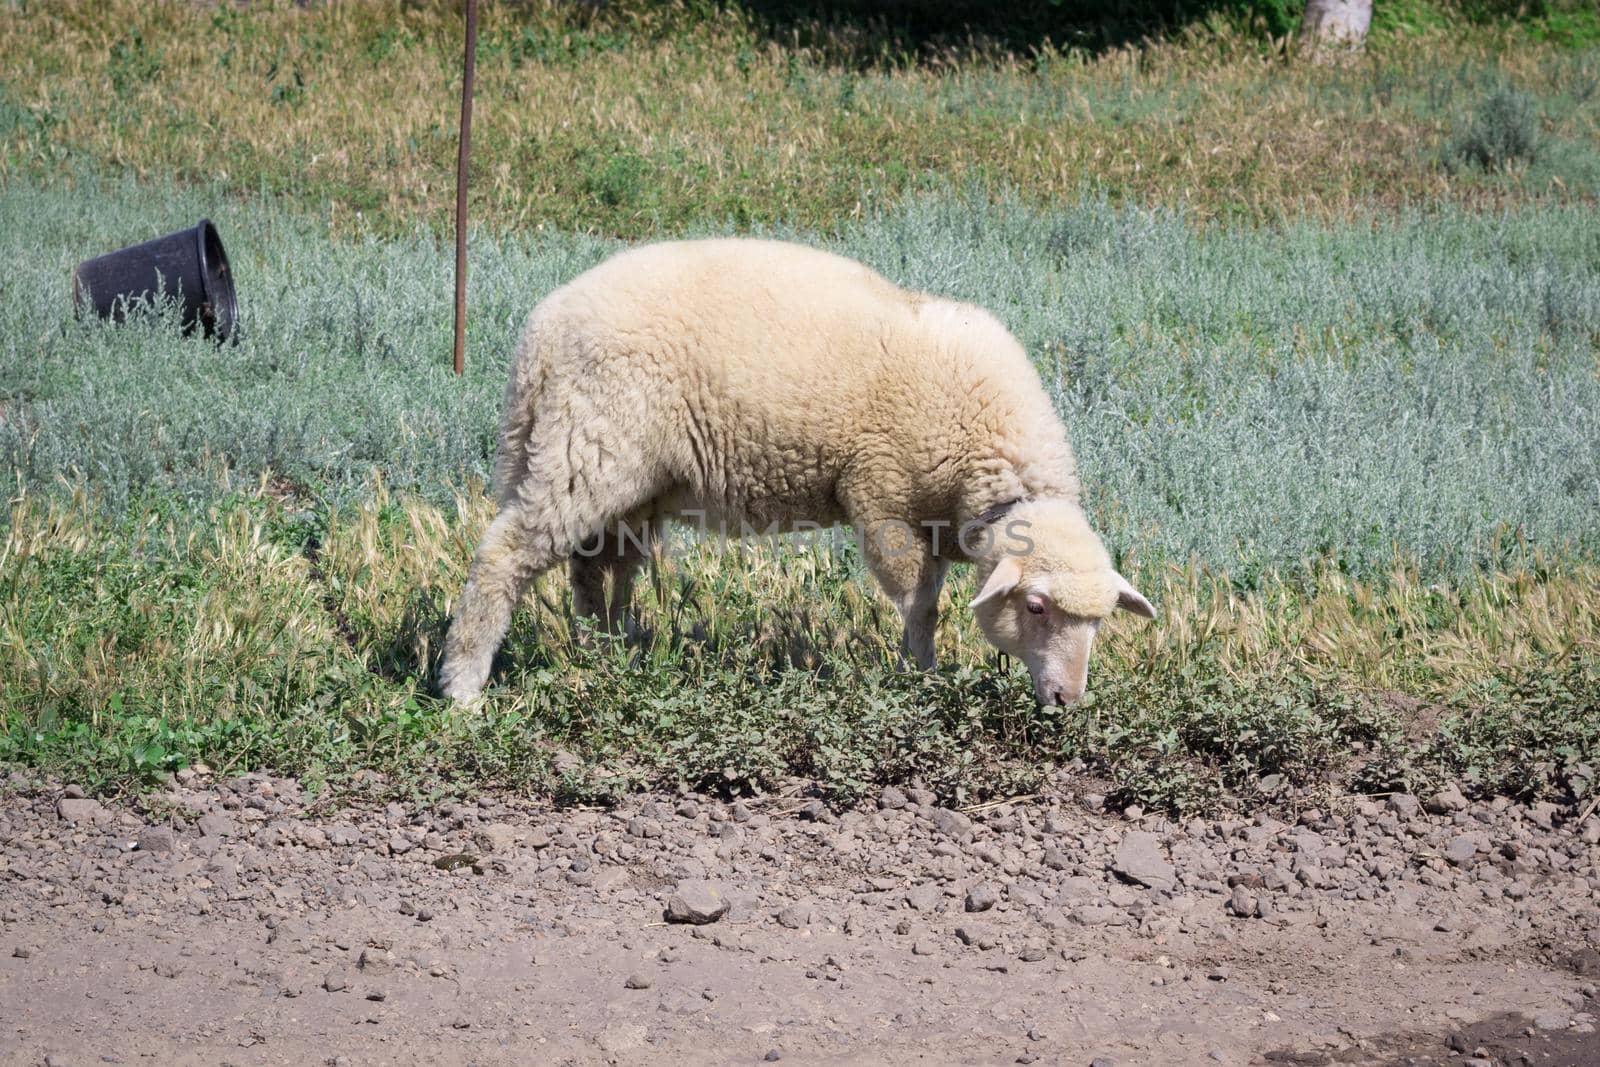 White sheep stands in grass pasture breeding